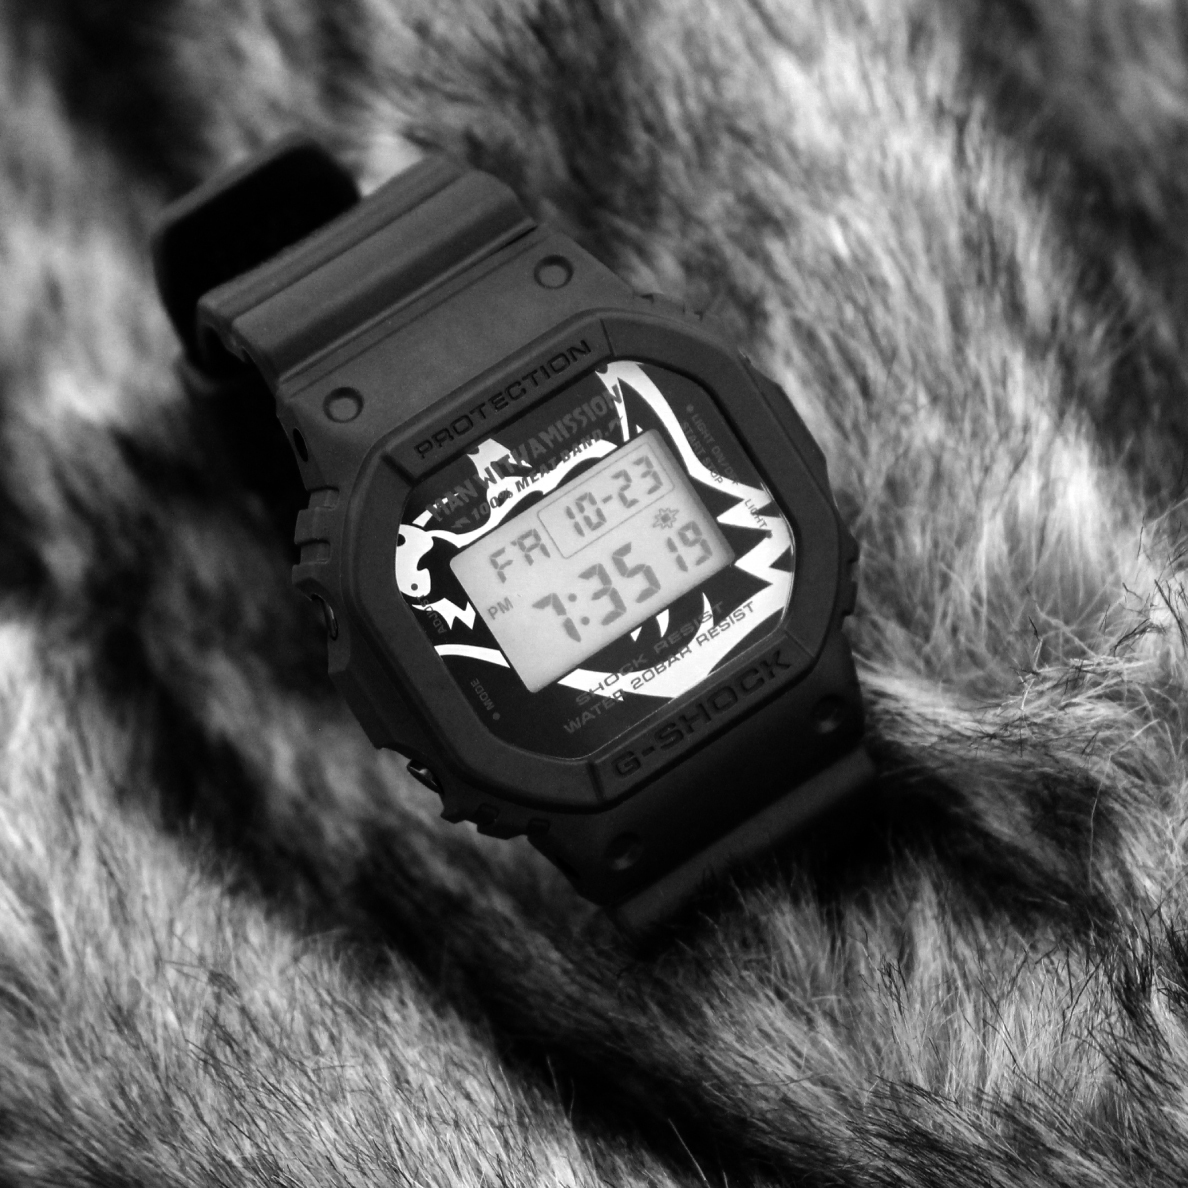 MAN WITH A MISSION Original G-SHOCK | FUN WITH A MISSION